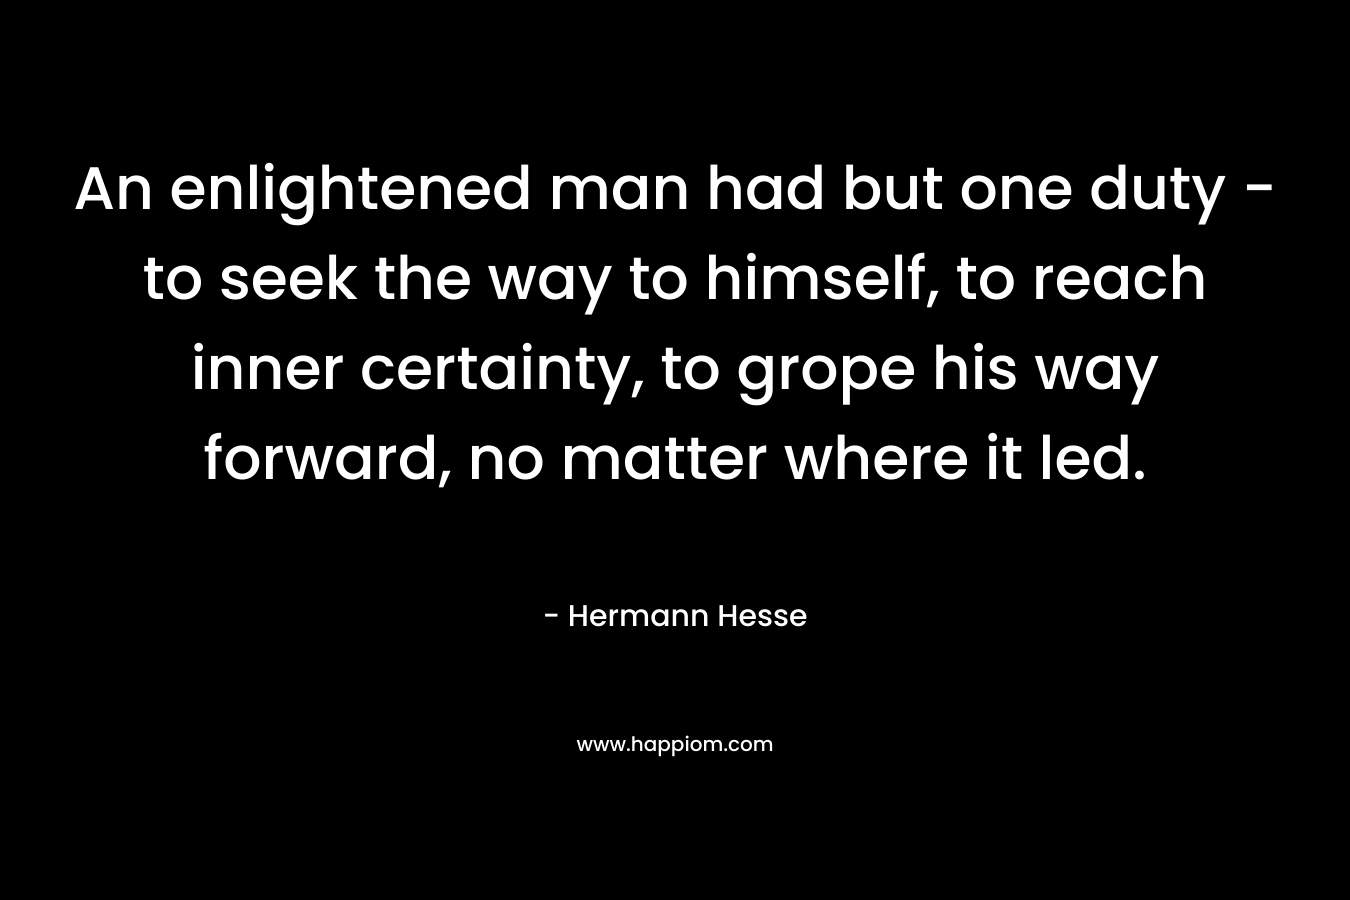 An enlightened man had but one duty – to seek the way to himself, to reach inner certainty, to grope his way forward, no matter where it led. – Hermann Hesse